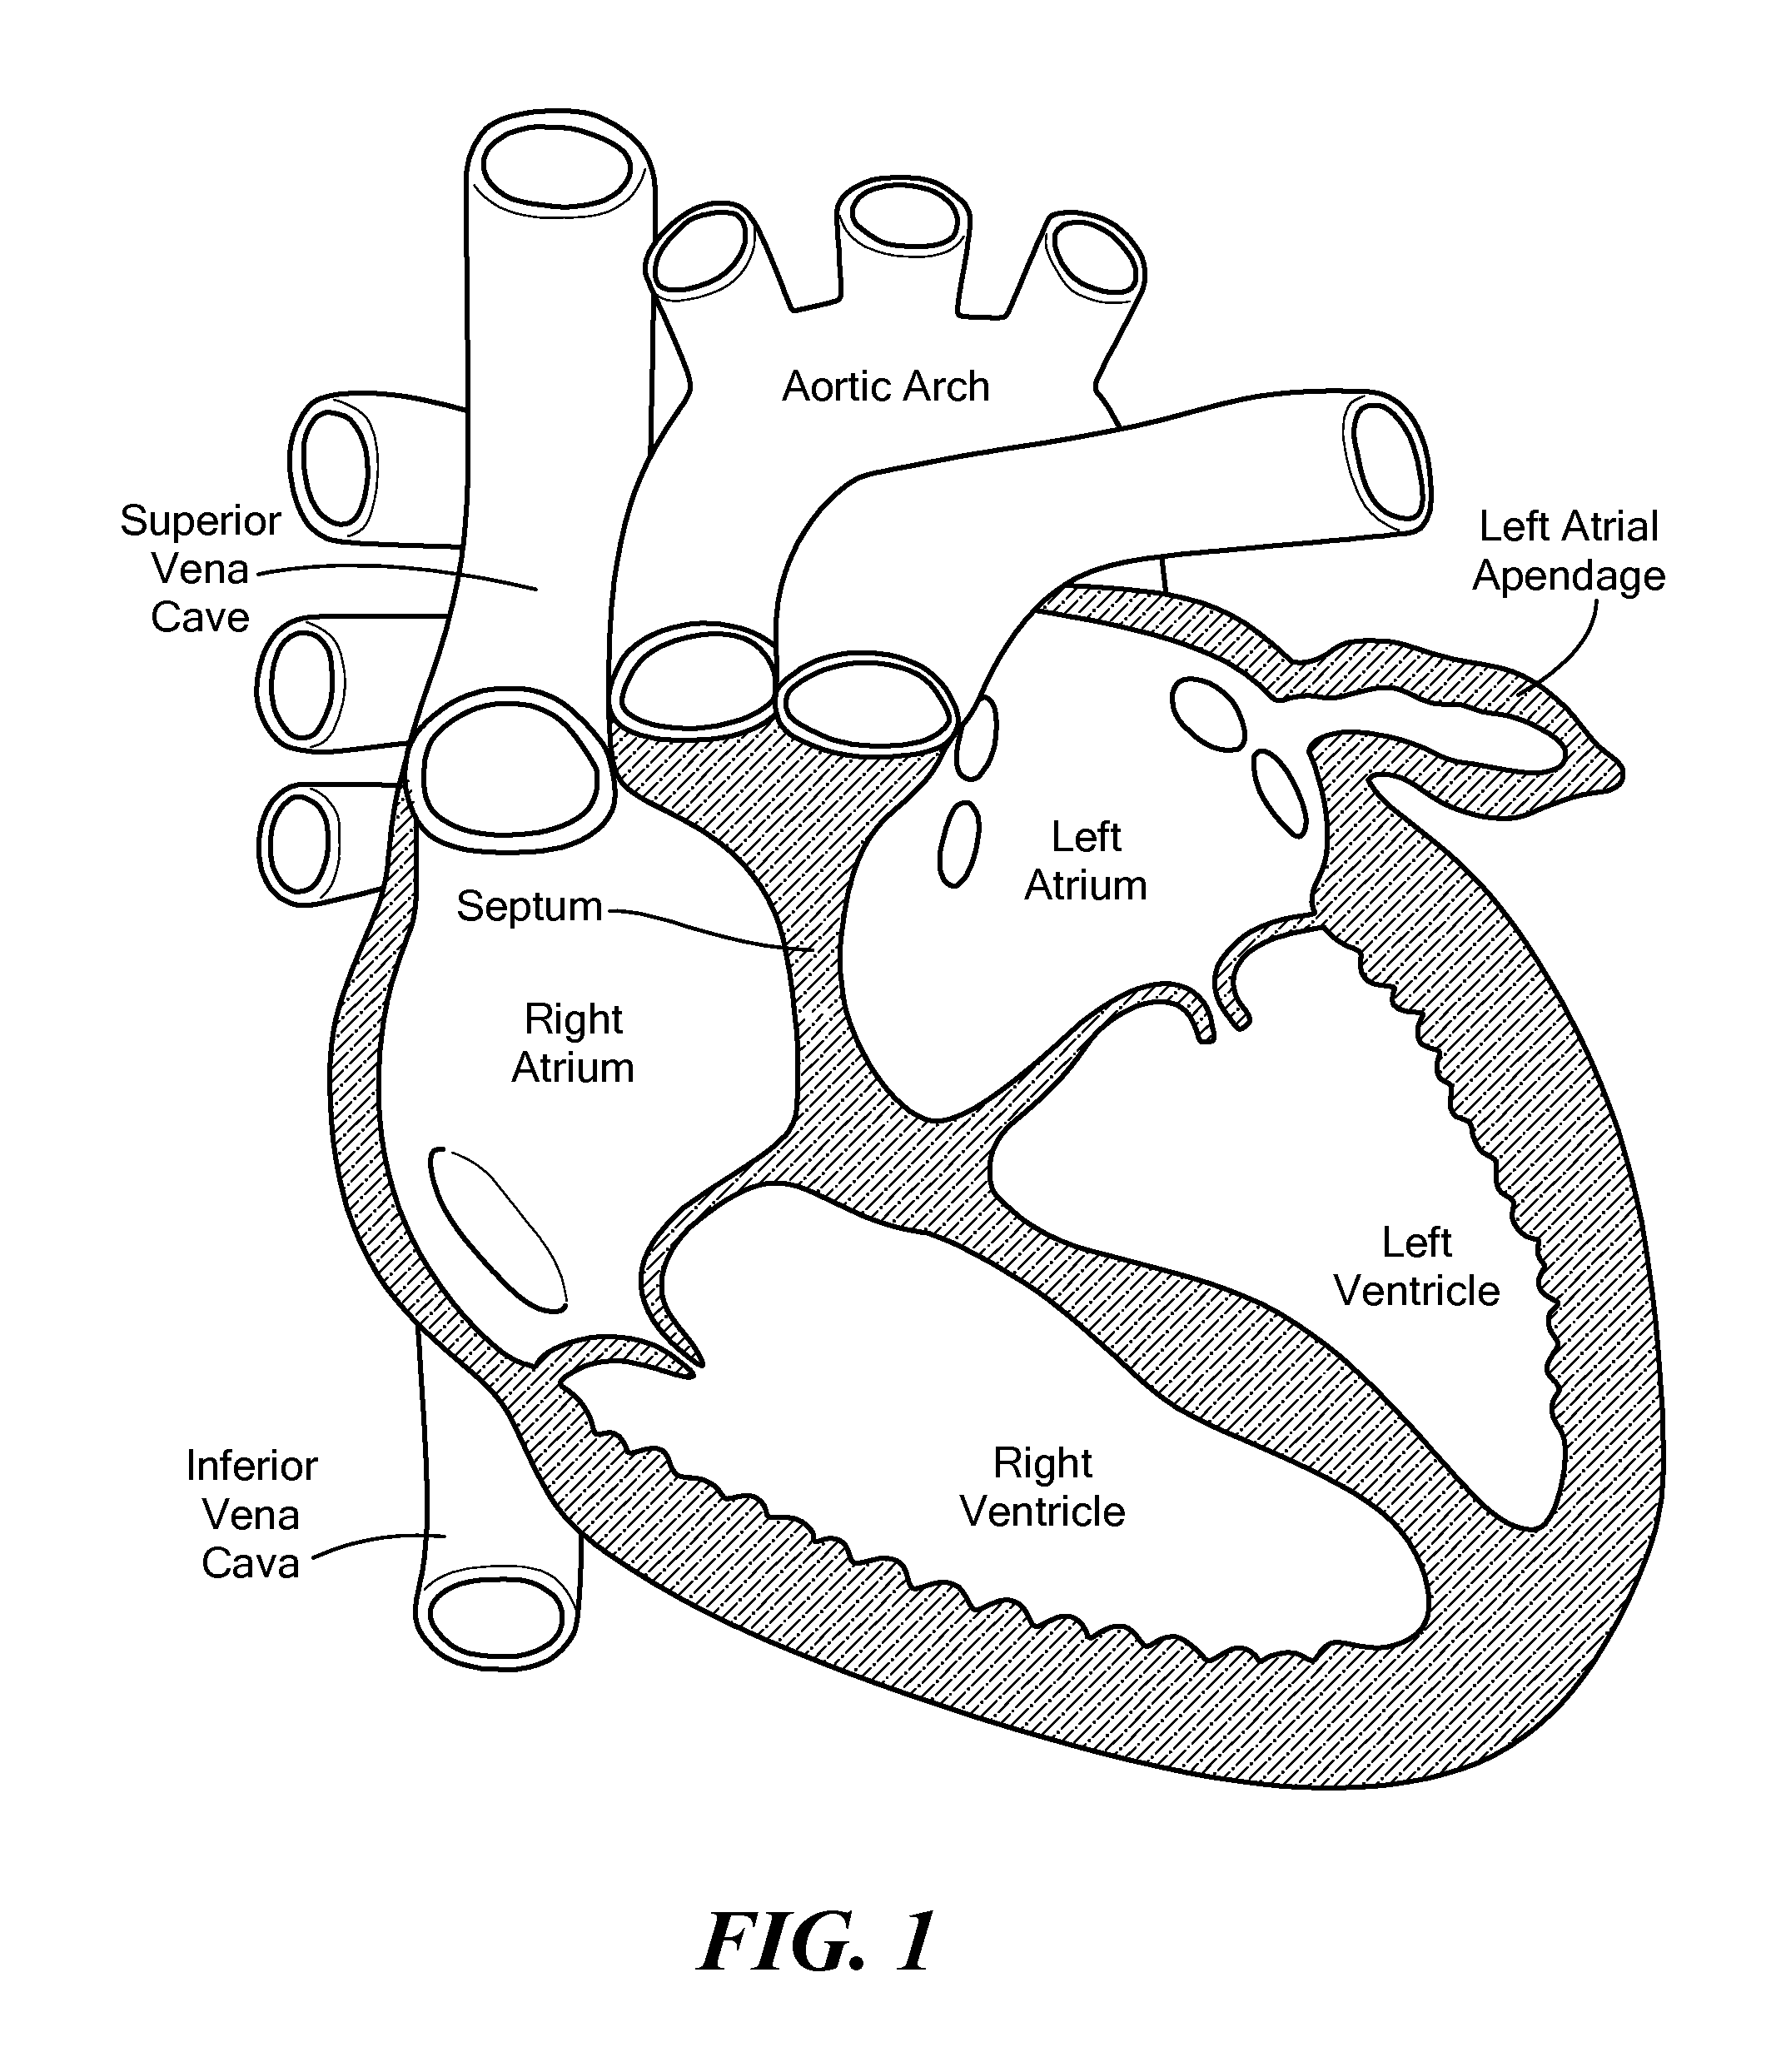 Cryoadhesive device for left atrial appendage occlusion